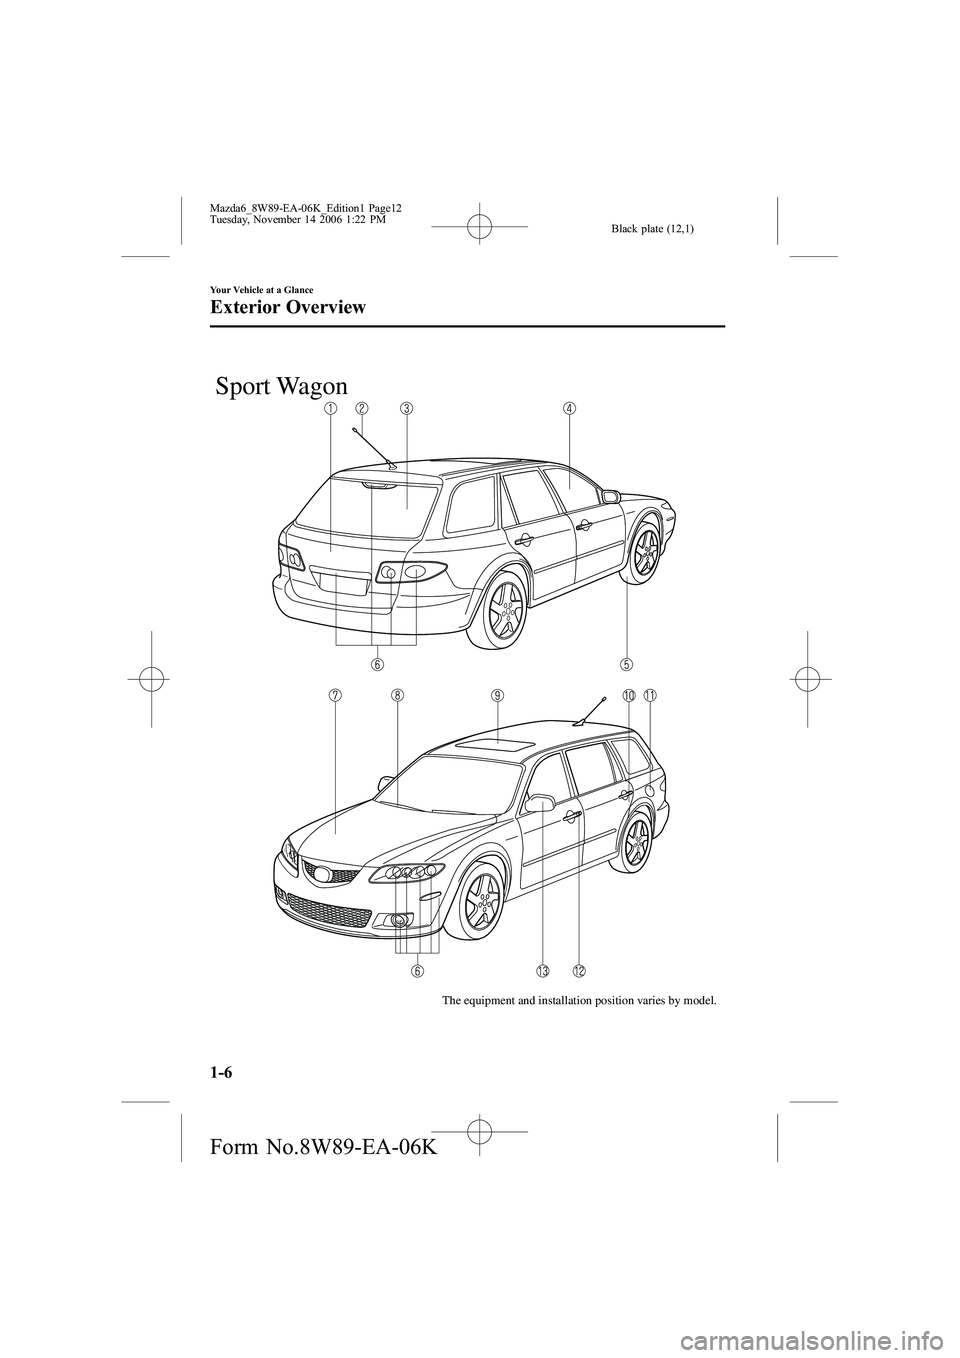 MAZDA MODEL 6 WAGON 2007 User Guide Black plate (12,1)
The equipment and installation position varies by model.
Sport Wagon
1-6
Your Vehicle at a Glance
Exterior Overview
Mazda6_8W89-EA-06K_Edition1 Page12
Tuesday, November 14 2006 1:22